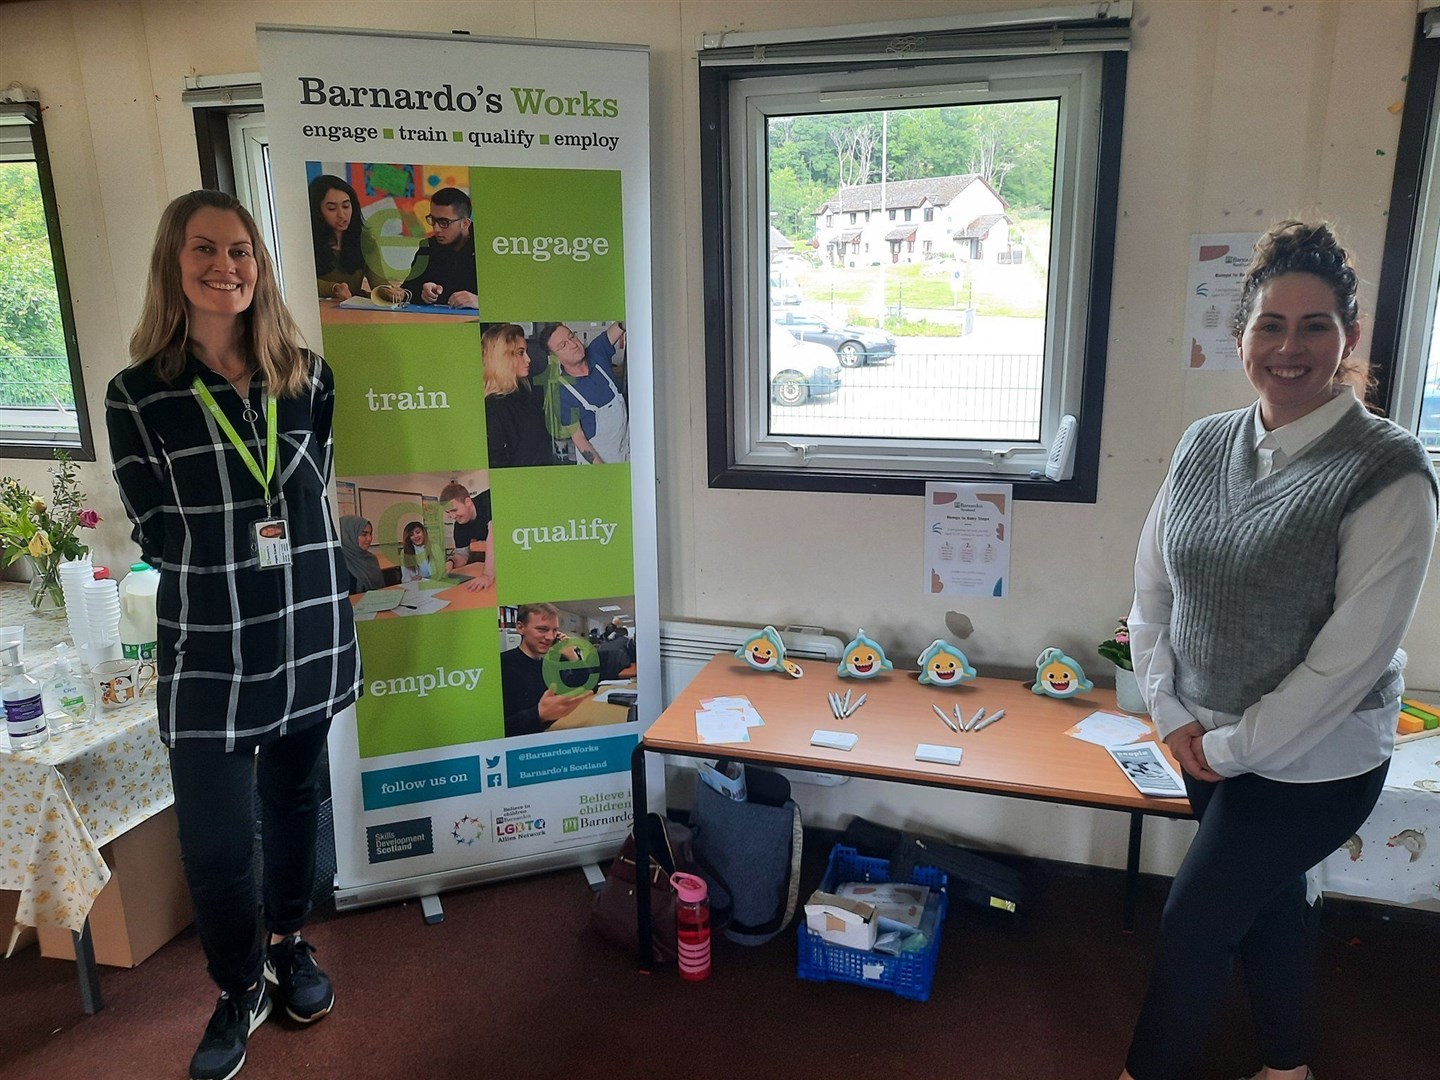 Barnardo's is one of the many organizations that will work in partnership with the project.